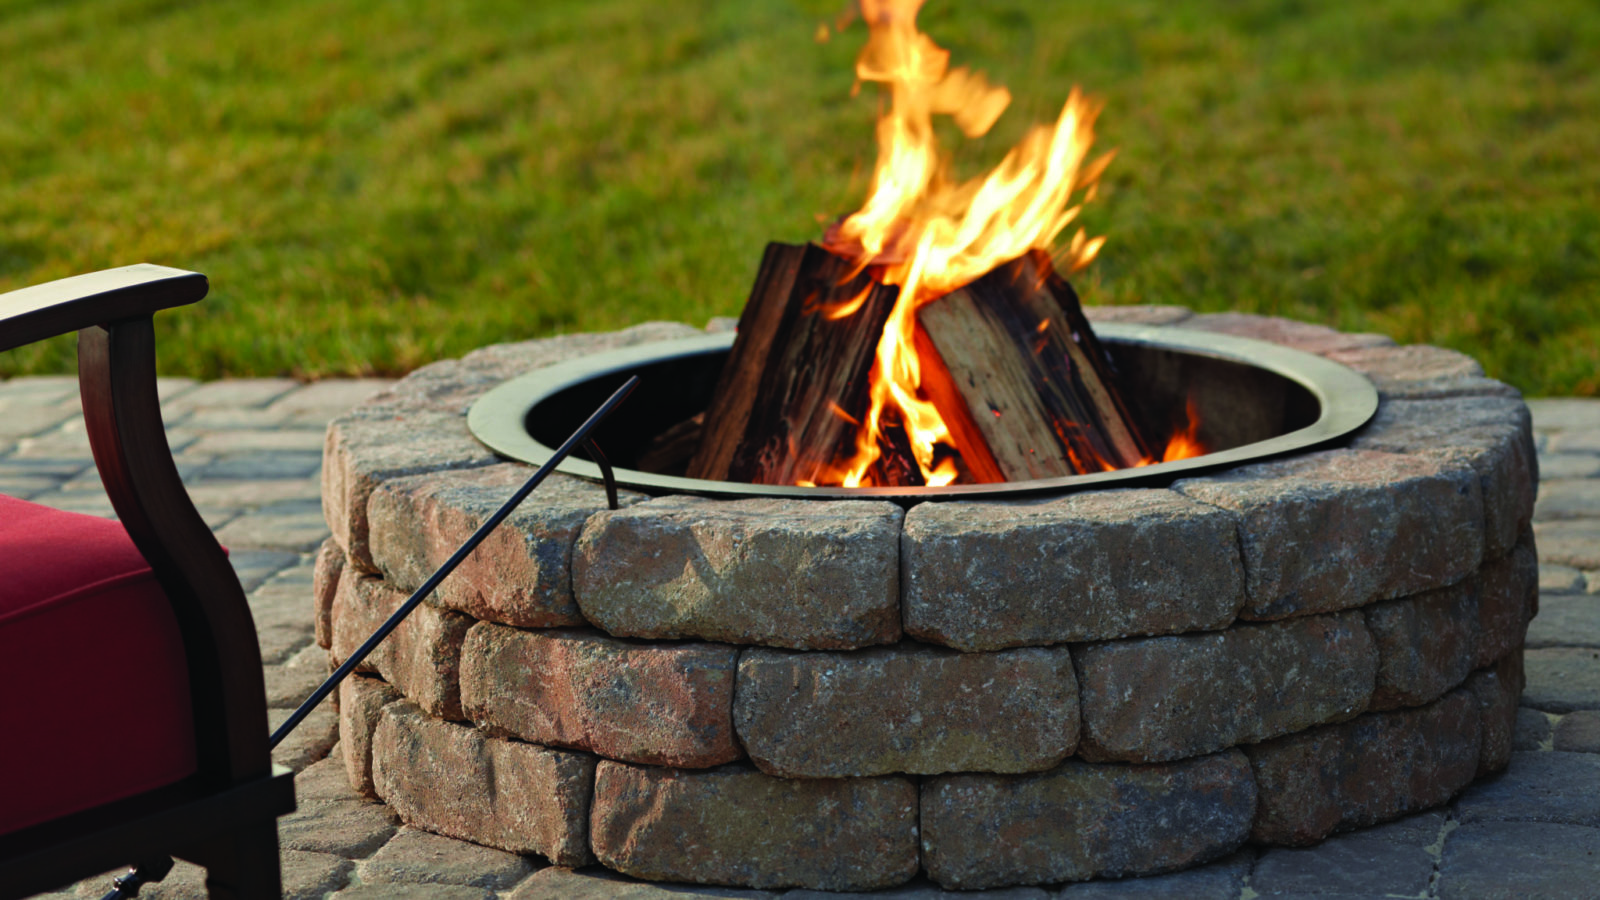 Gas Vs Wood Fire Pit Pros And Cons, Gas Line For Fire Pit Permit